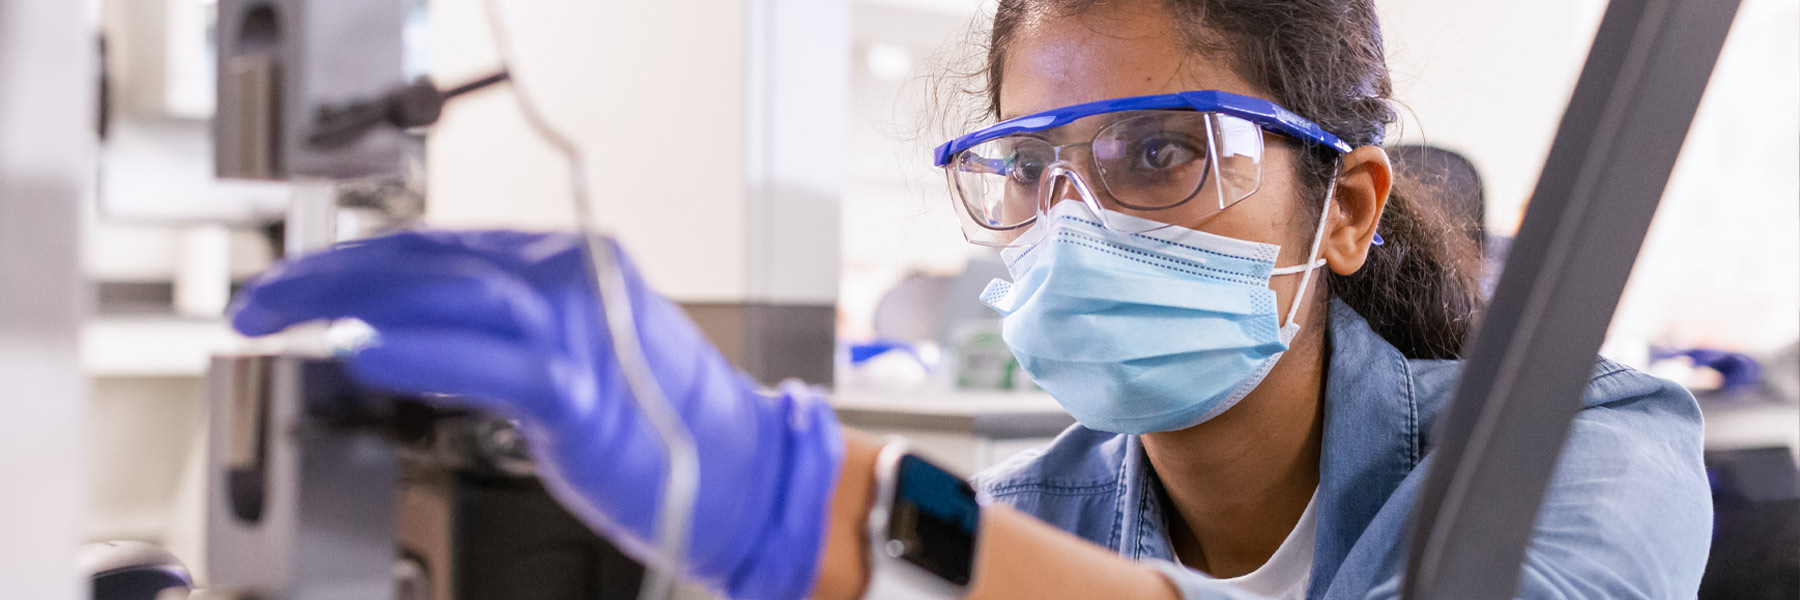 A young woman in safety glasses, mask, and gloves examines a piece of biomedical equipment.